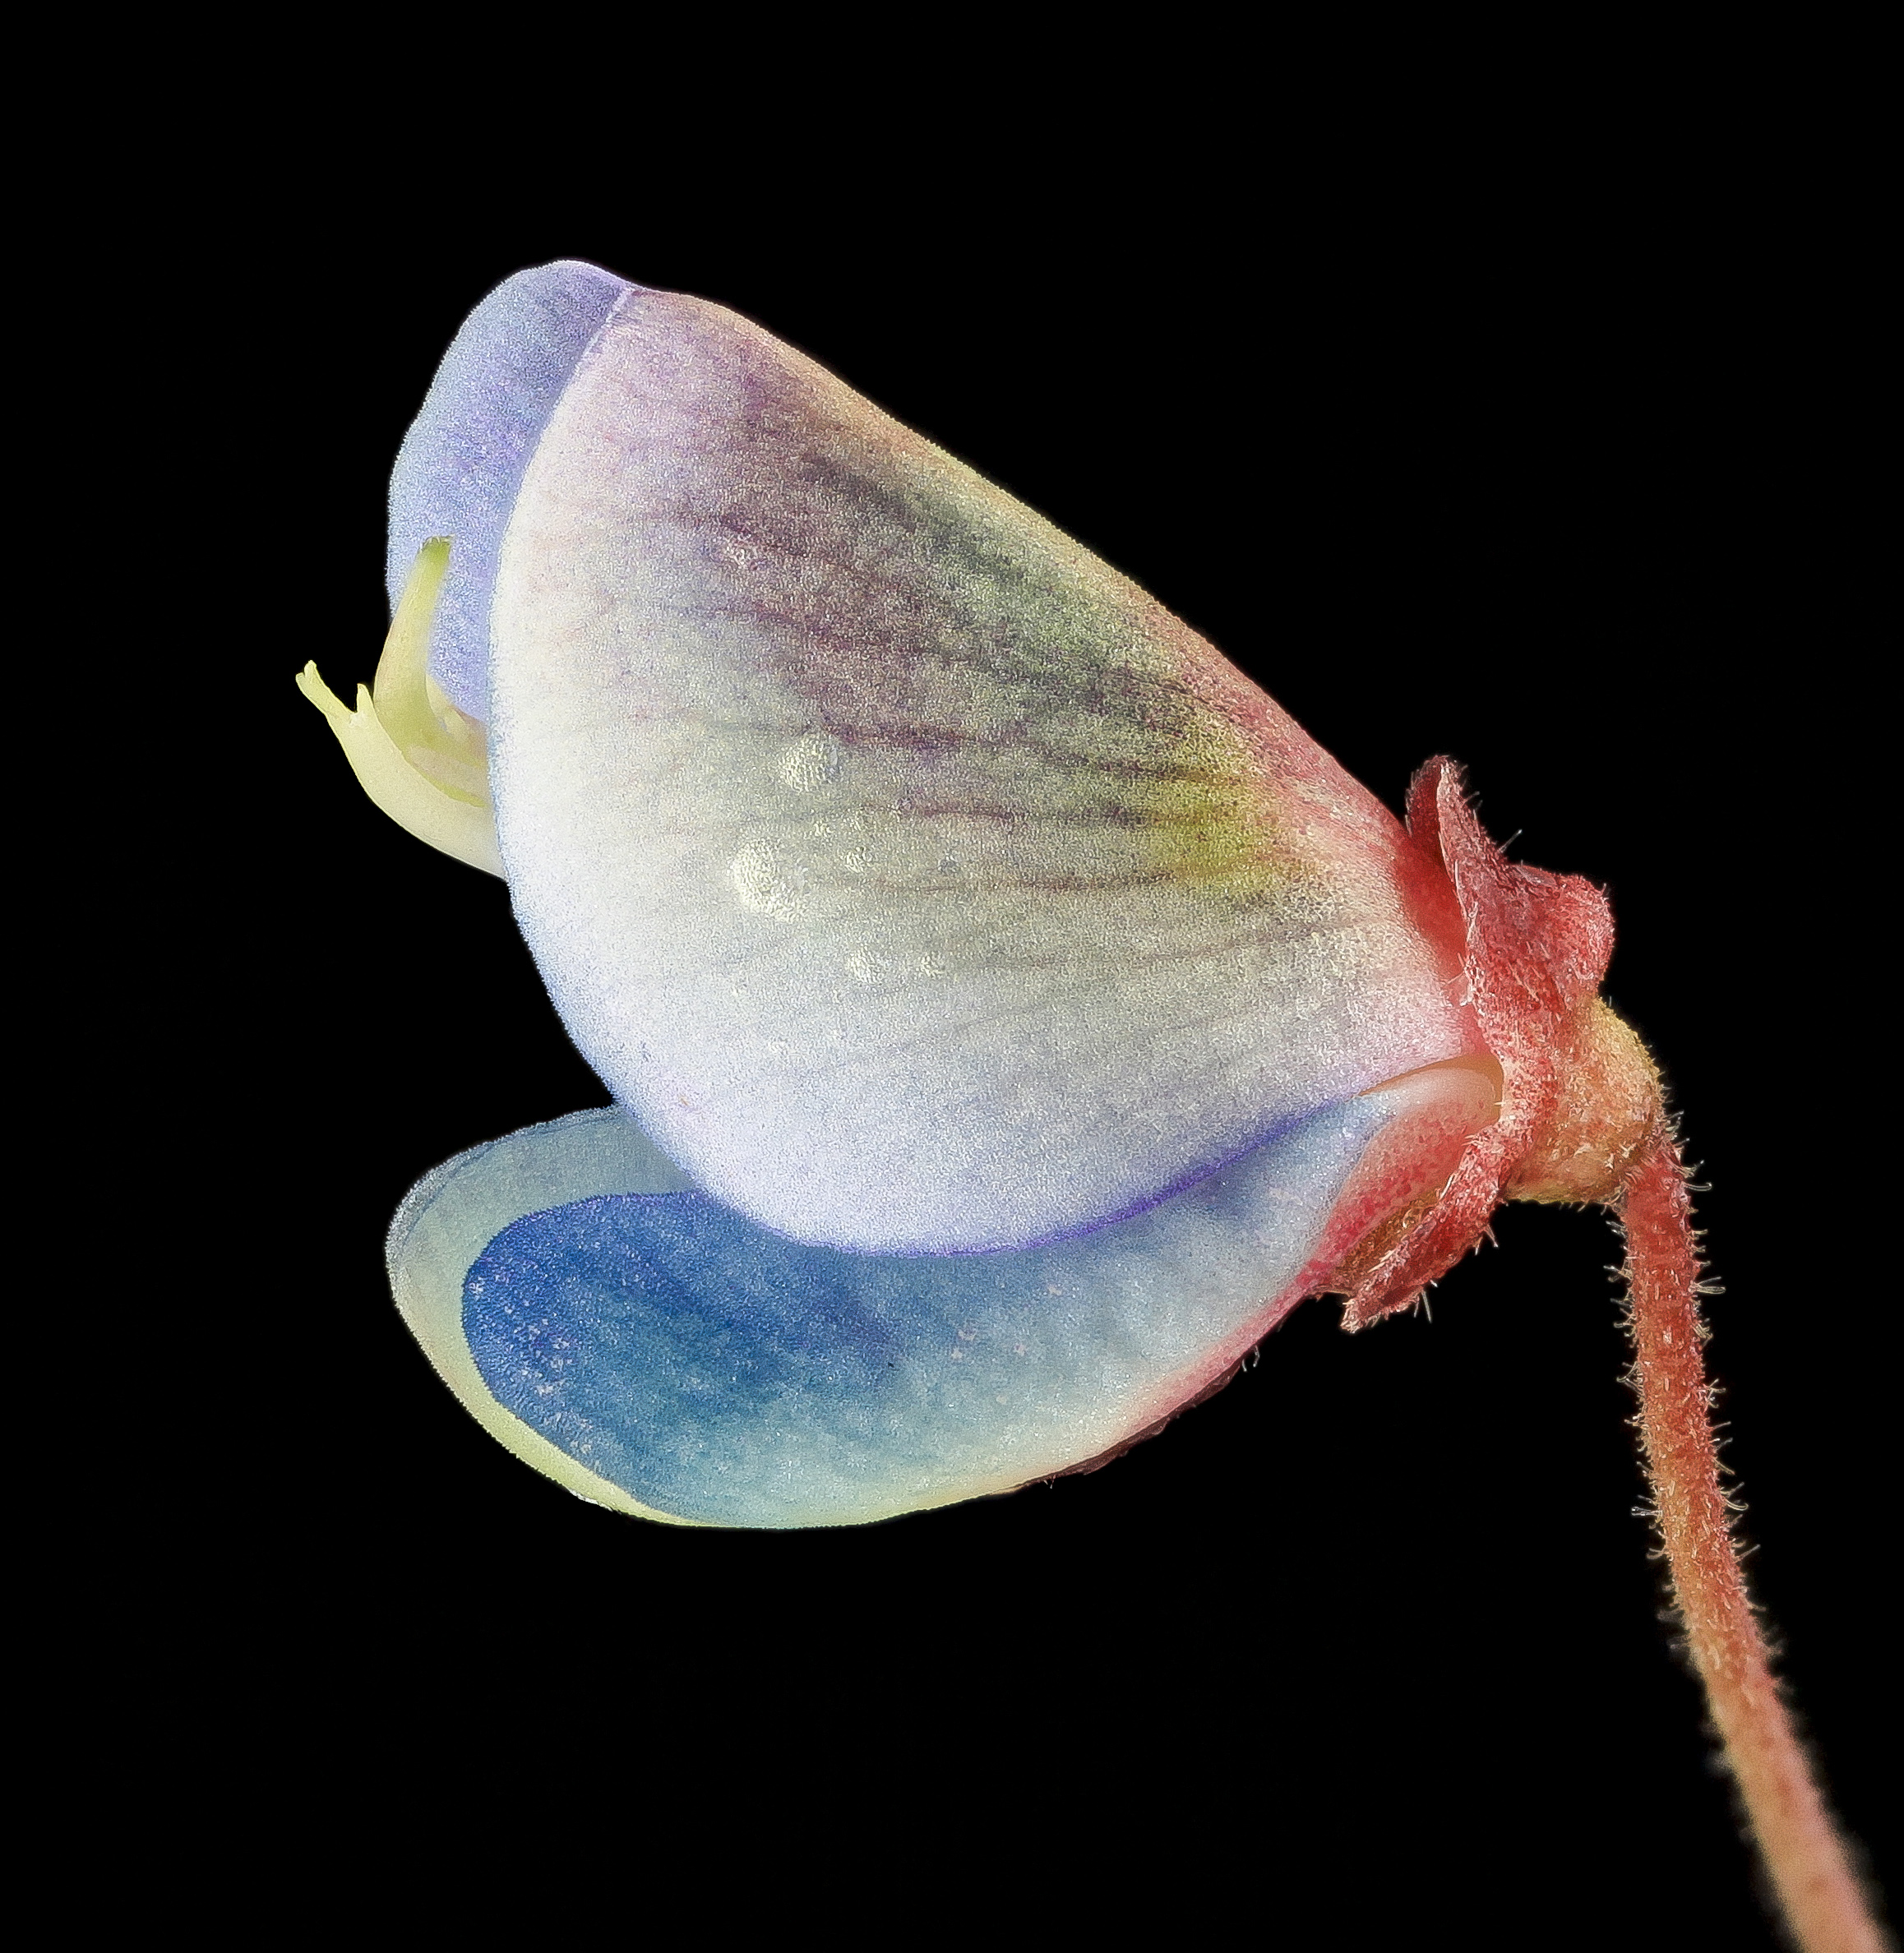 Ticktrefoil flower with dew 1, MD, PG County 2013-08-20-12.32.41 ZS PMax (9555697459)